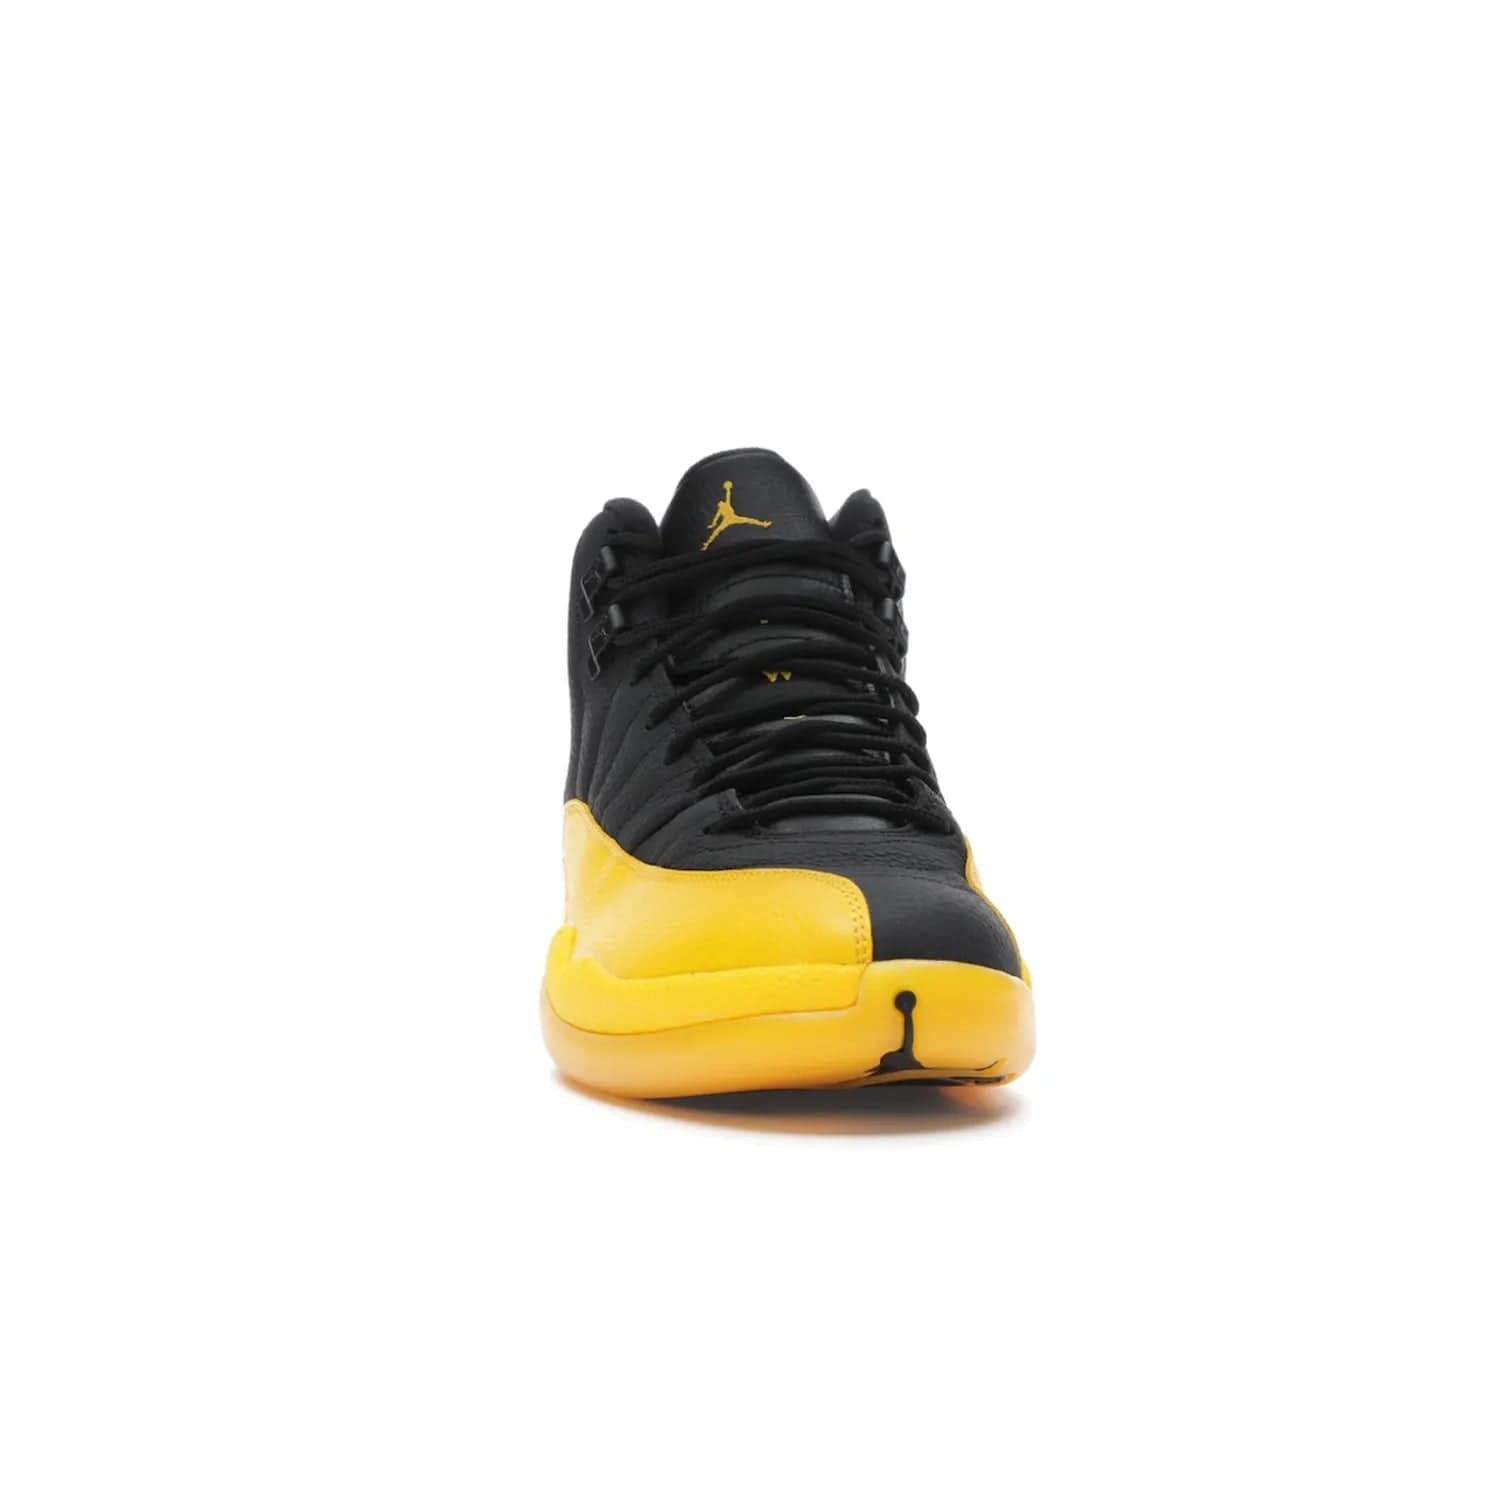 Jordan 12 Retro Black University Gold - Image 9 - Only at www.BallersClubKickz.com - This Jordan 12 Retro features a black tumbled leather upper and University Gold accents for a modern twist. Boasting Jordan "Two Three" branding and a yellow sole, these shoes will elevate your wardrobe. Fresh, sleek, and one of a kind - the Jordan 12 University Gold is your summer sneaker.